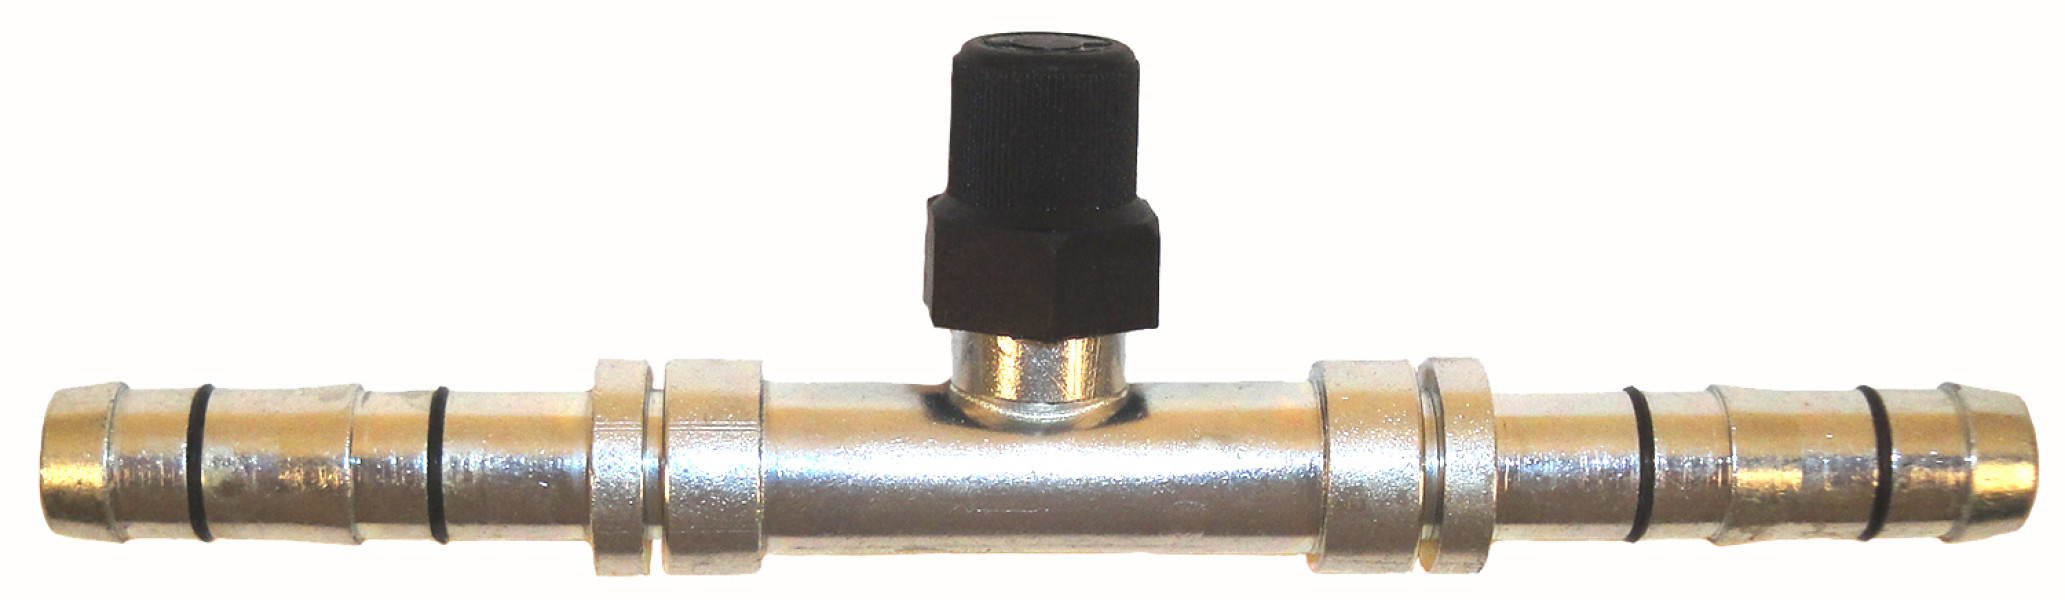 Image of A/C Refrigerant Hose Fitting from Sunair. Part number: FJ3427-0808S